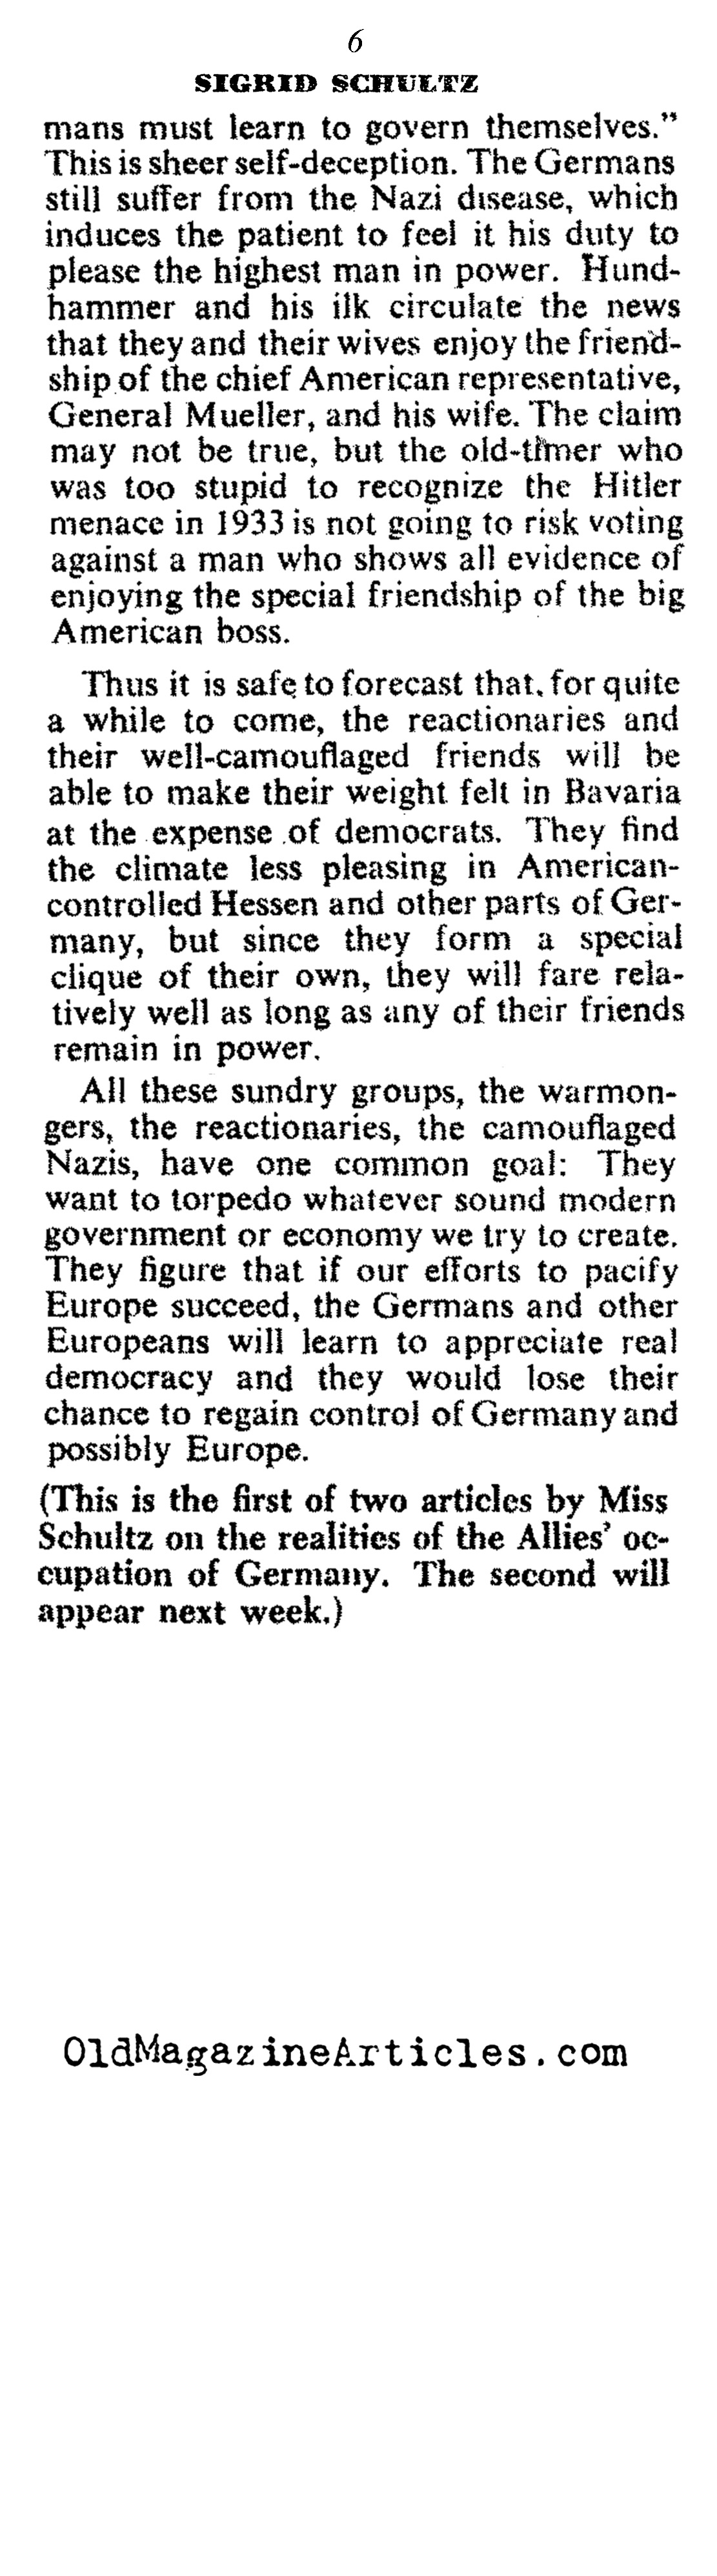 The Rebellious Souls in Post-War Germany (Collier's Magazine, 1947)